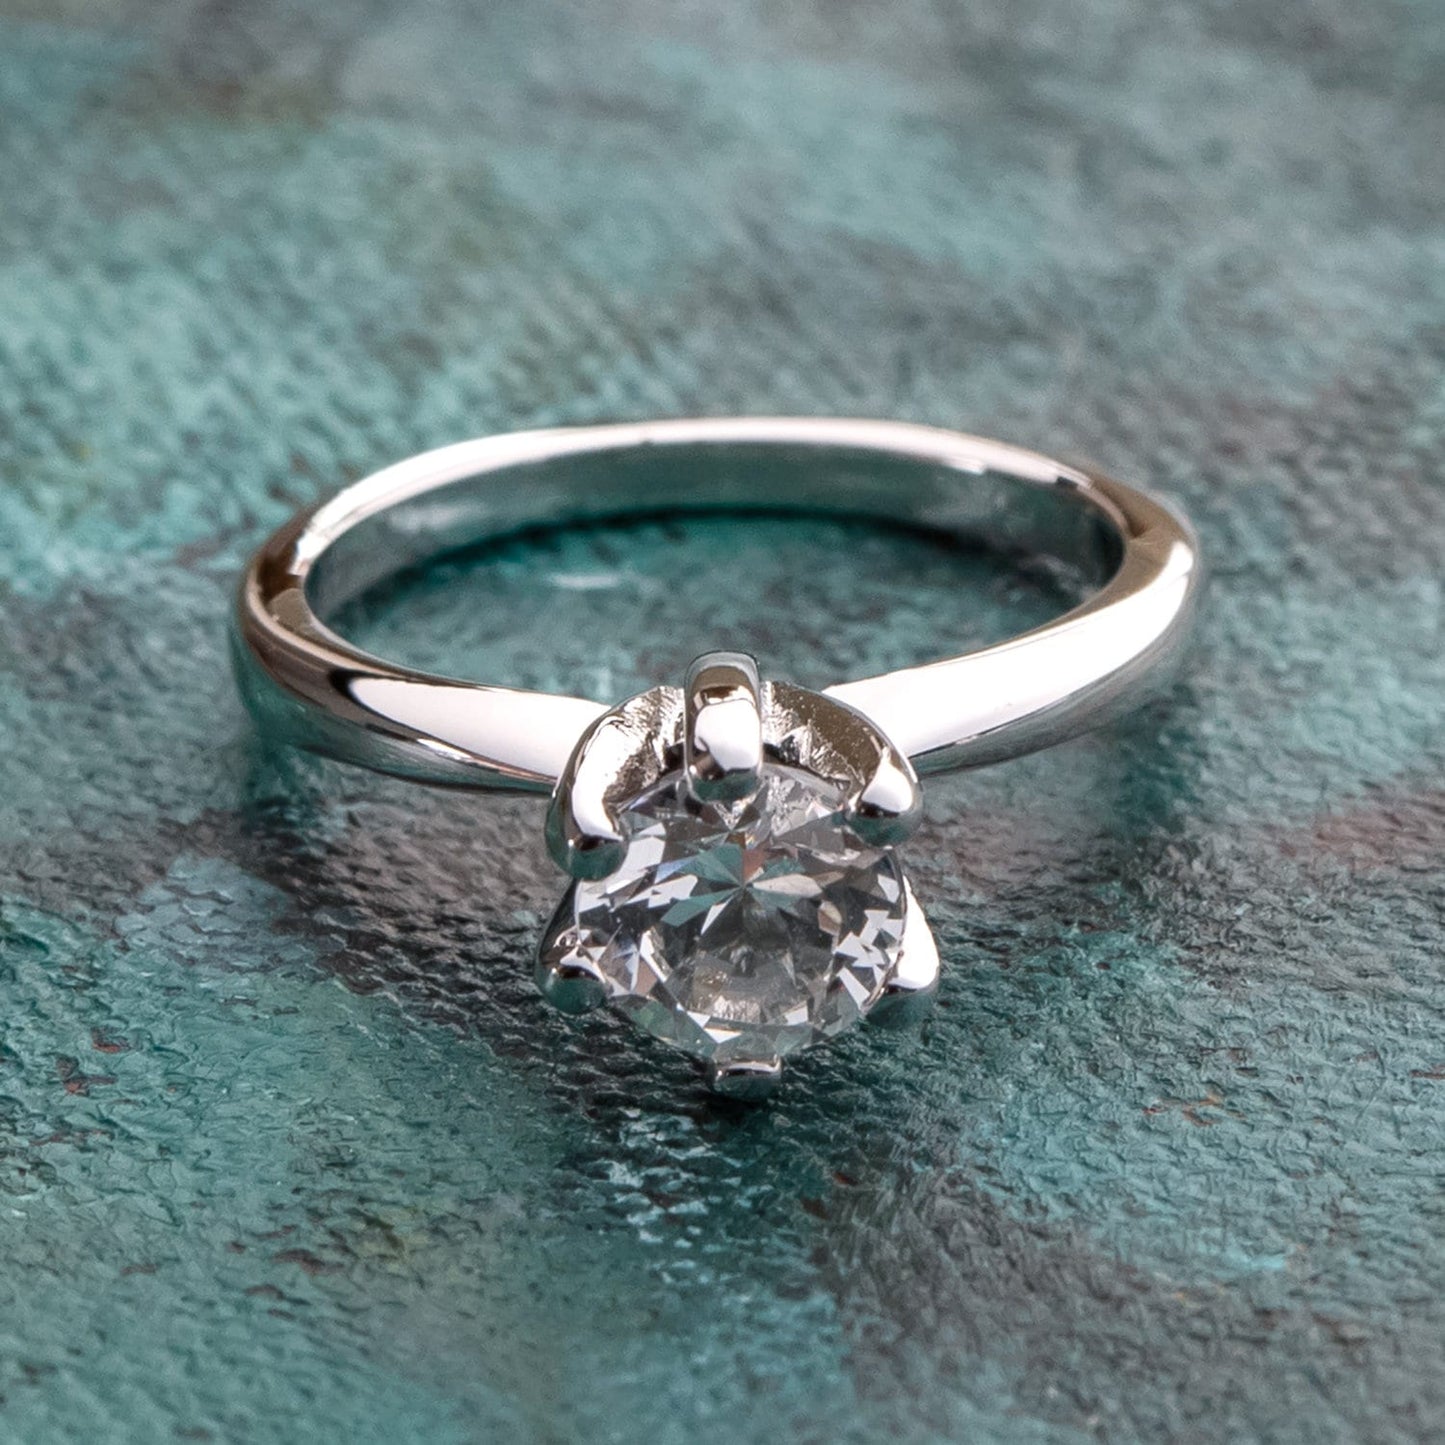 Vintage Ring Genuine Spinel Stone Solitaire Engagement Style Ring 1ct. Weight 18k White Gold Silver Antique Womans Promise Engagement R1600 Size: 10